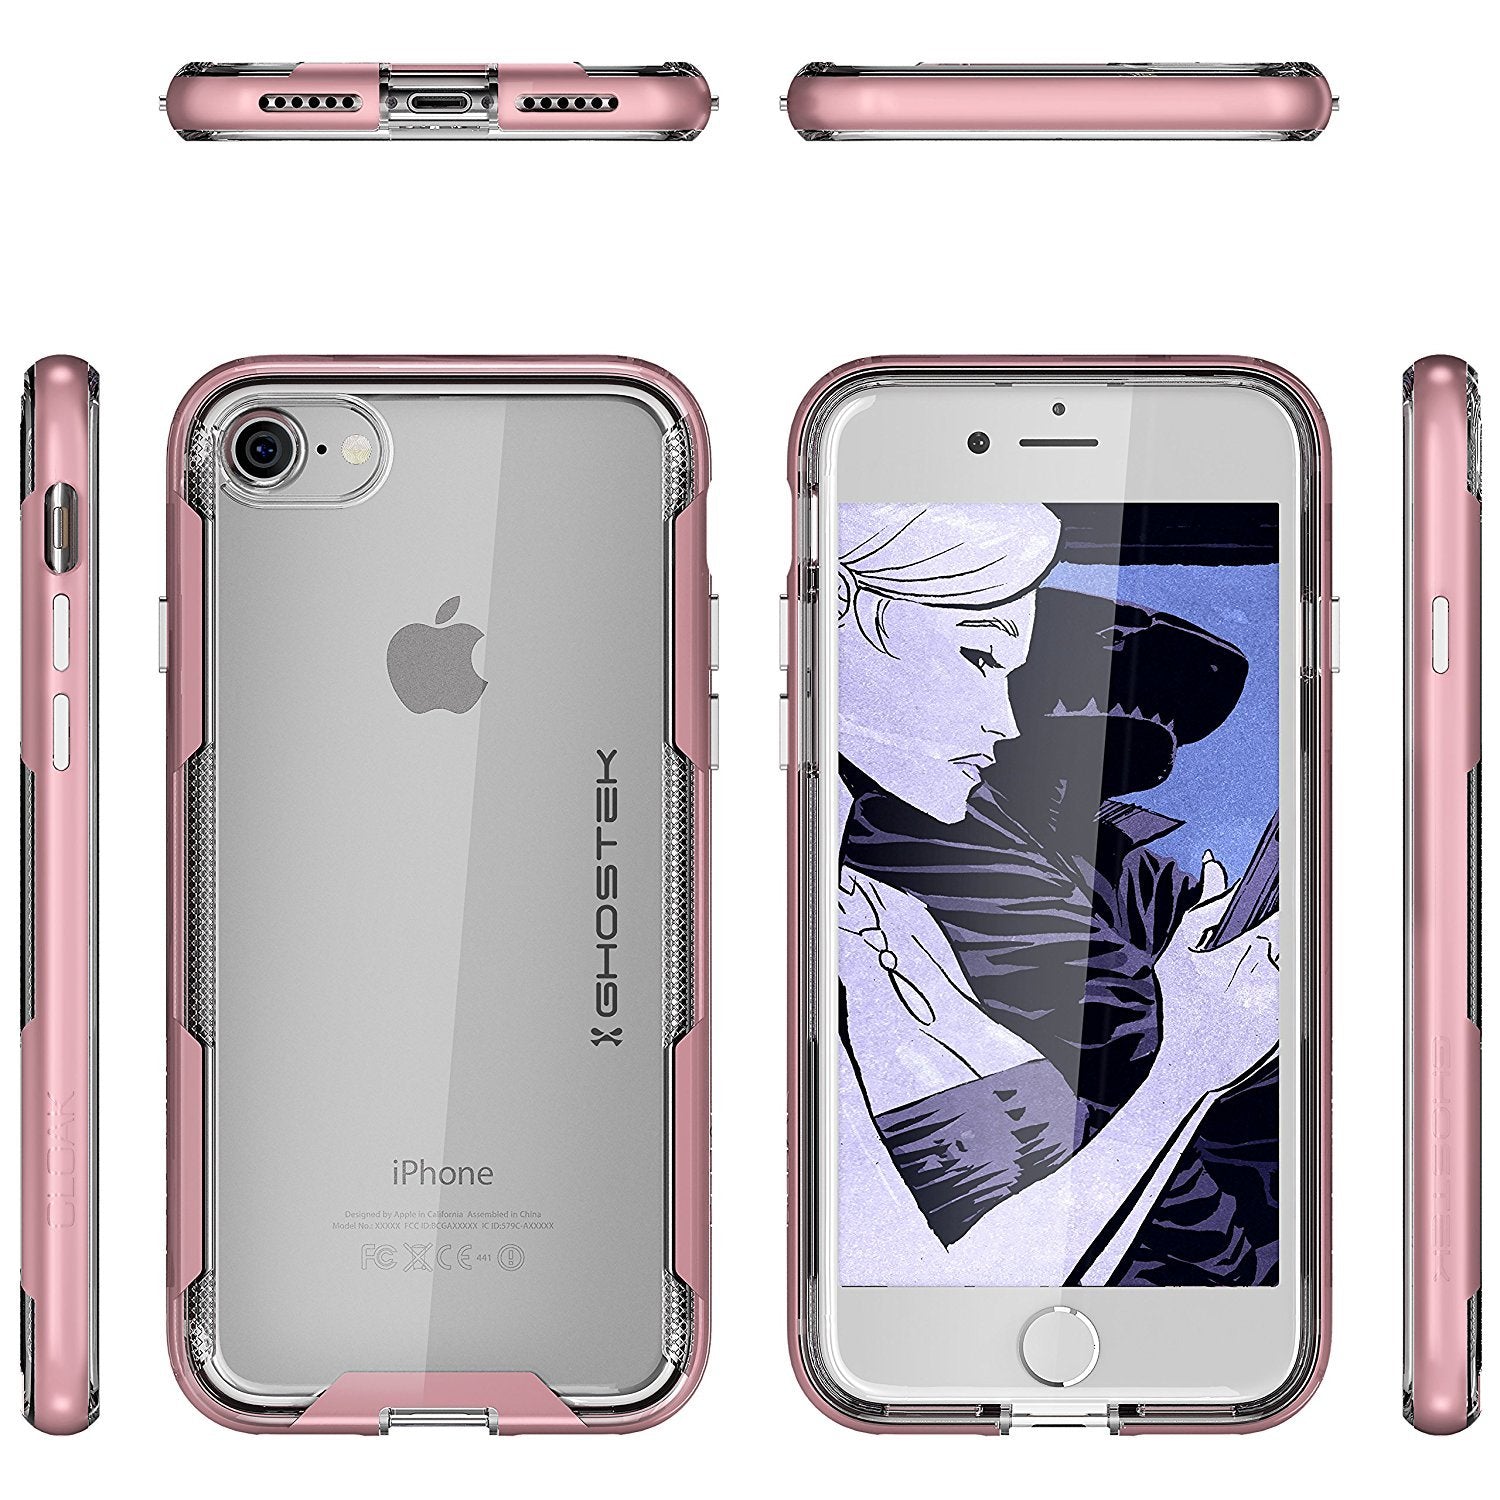 iPhone 7 Case, Ghostek Cloak 3 Series Case for iPhone 7 Case Clear Protective Case [Rose Pink] - PunkCase NZ